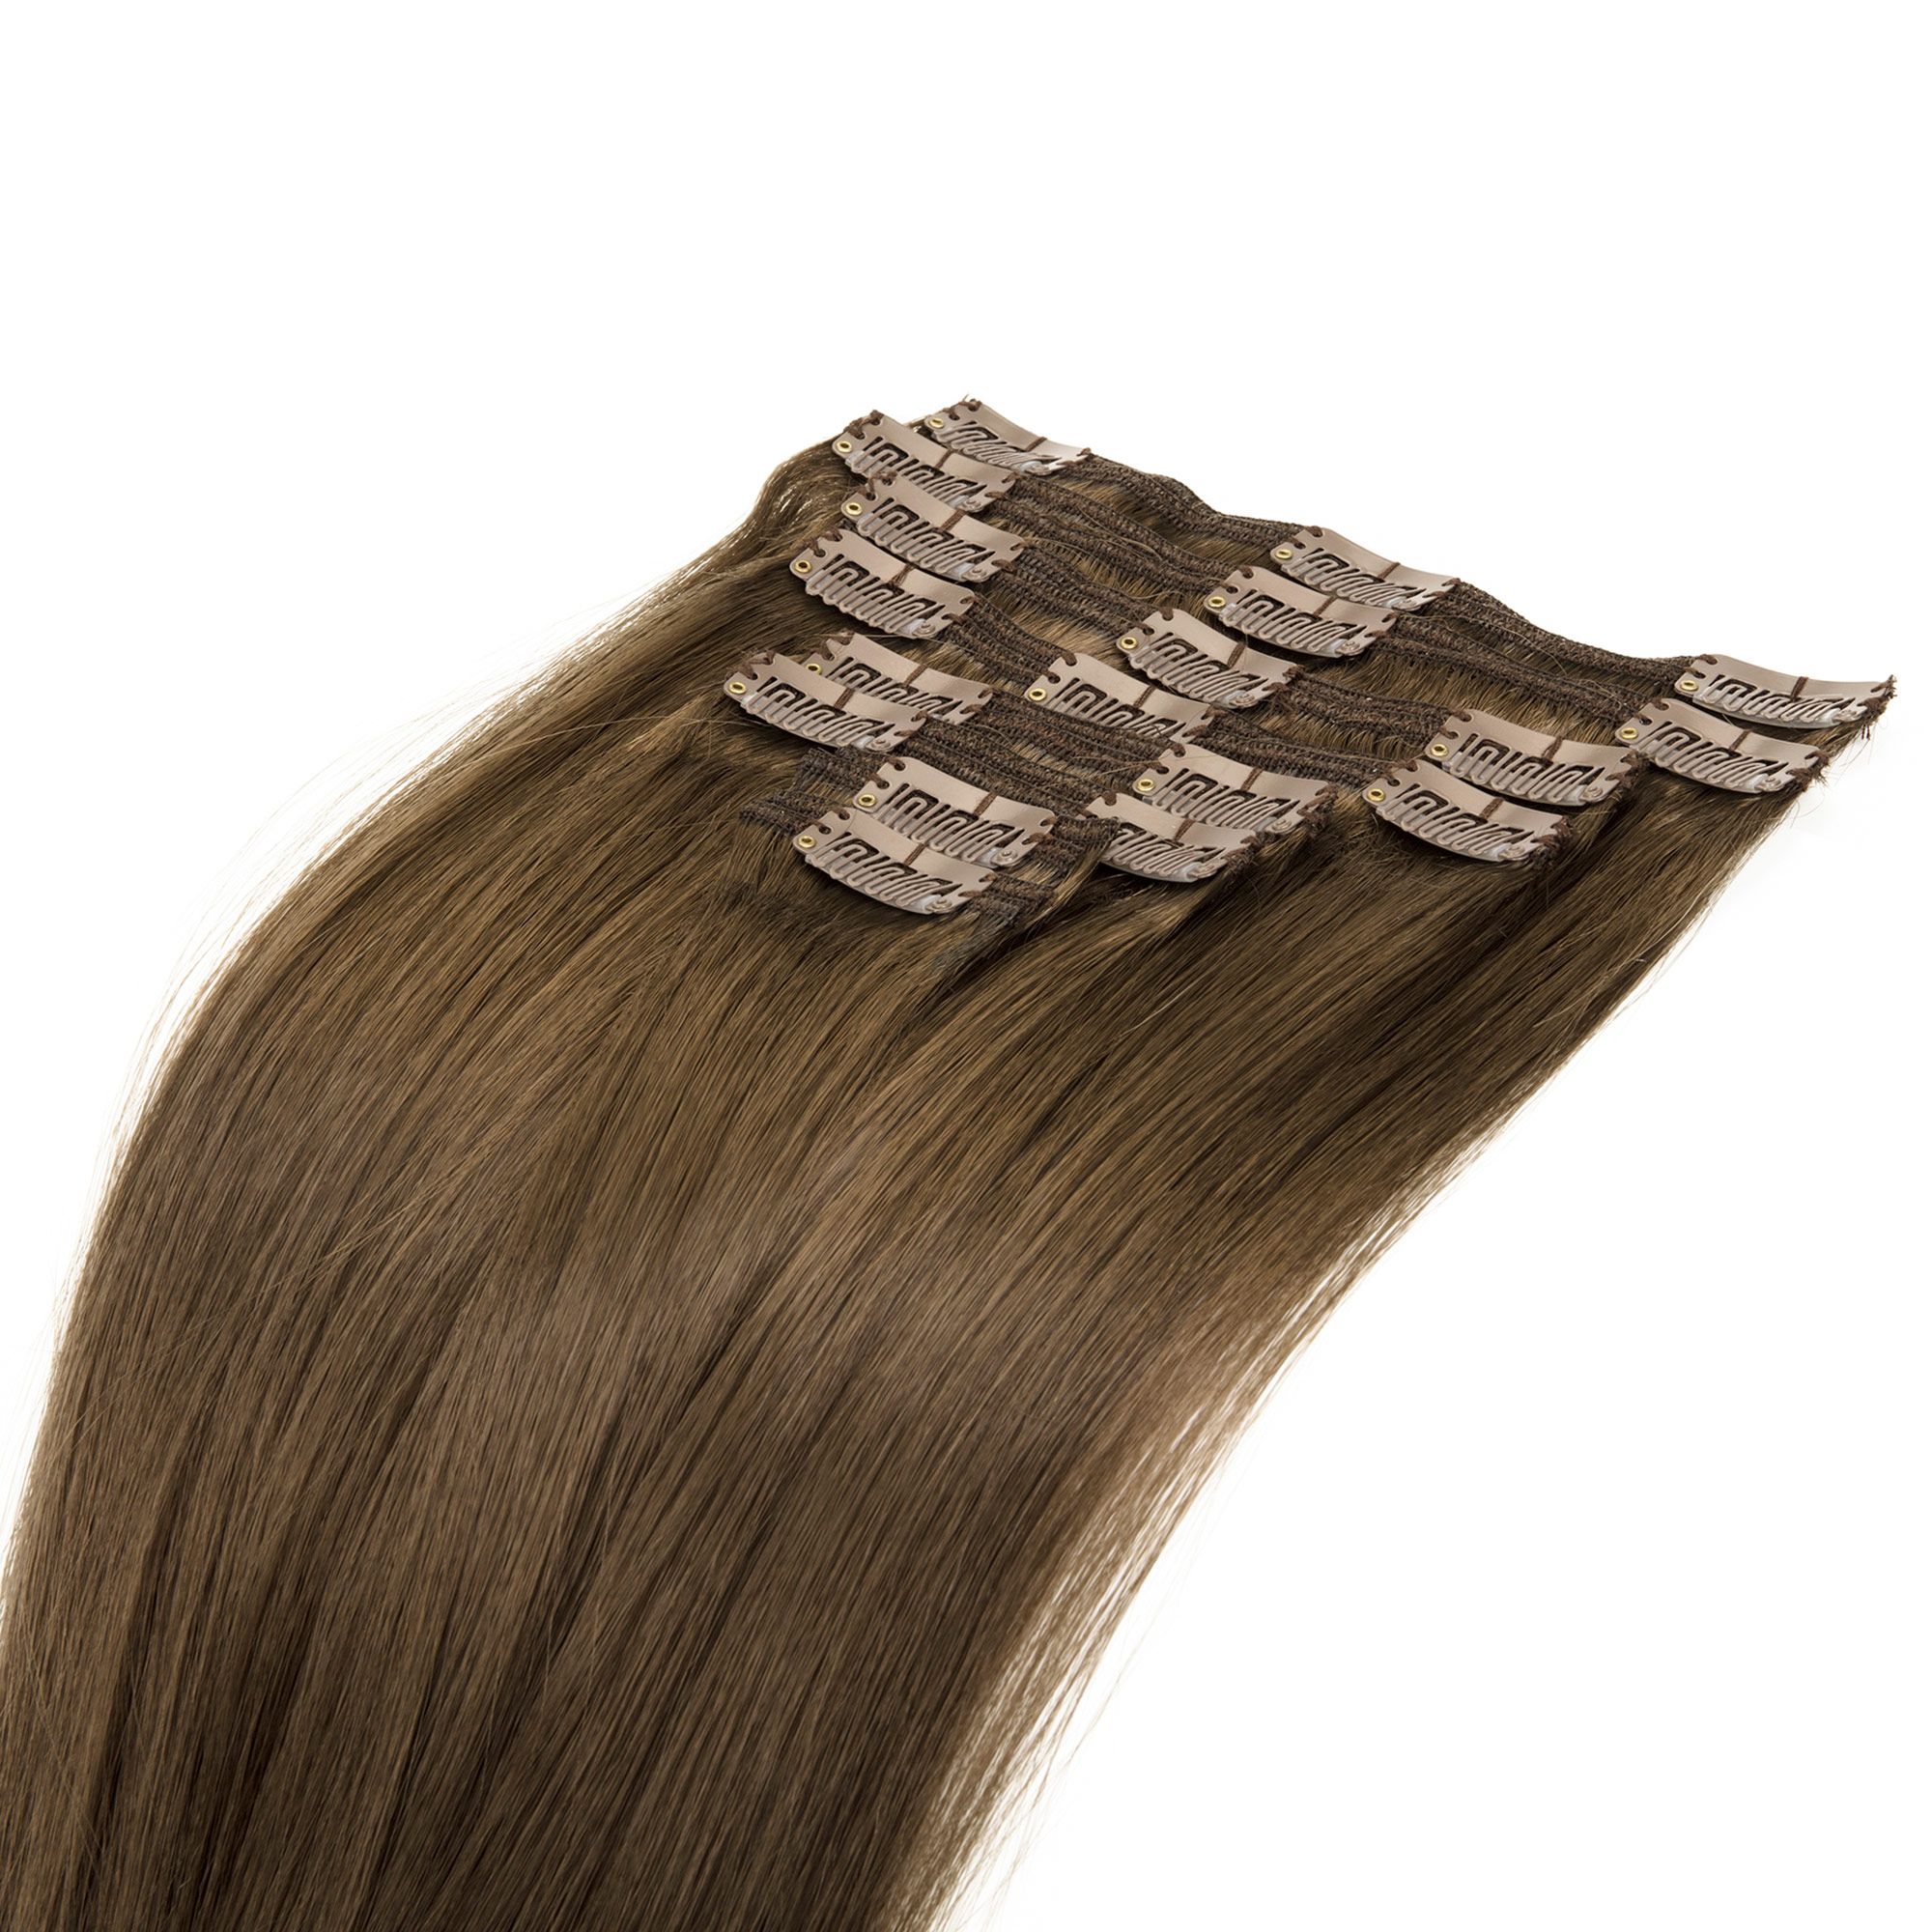 LELINTA 8pcs 14" 16" 18" 20" 22" Clip in Hair Extensions Remy Human Hair Women Silky Straight Human Hair Extensions 18 Clips - image 2 of 8